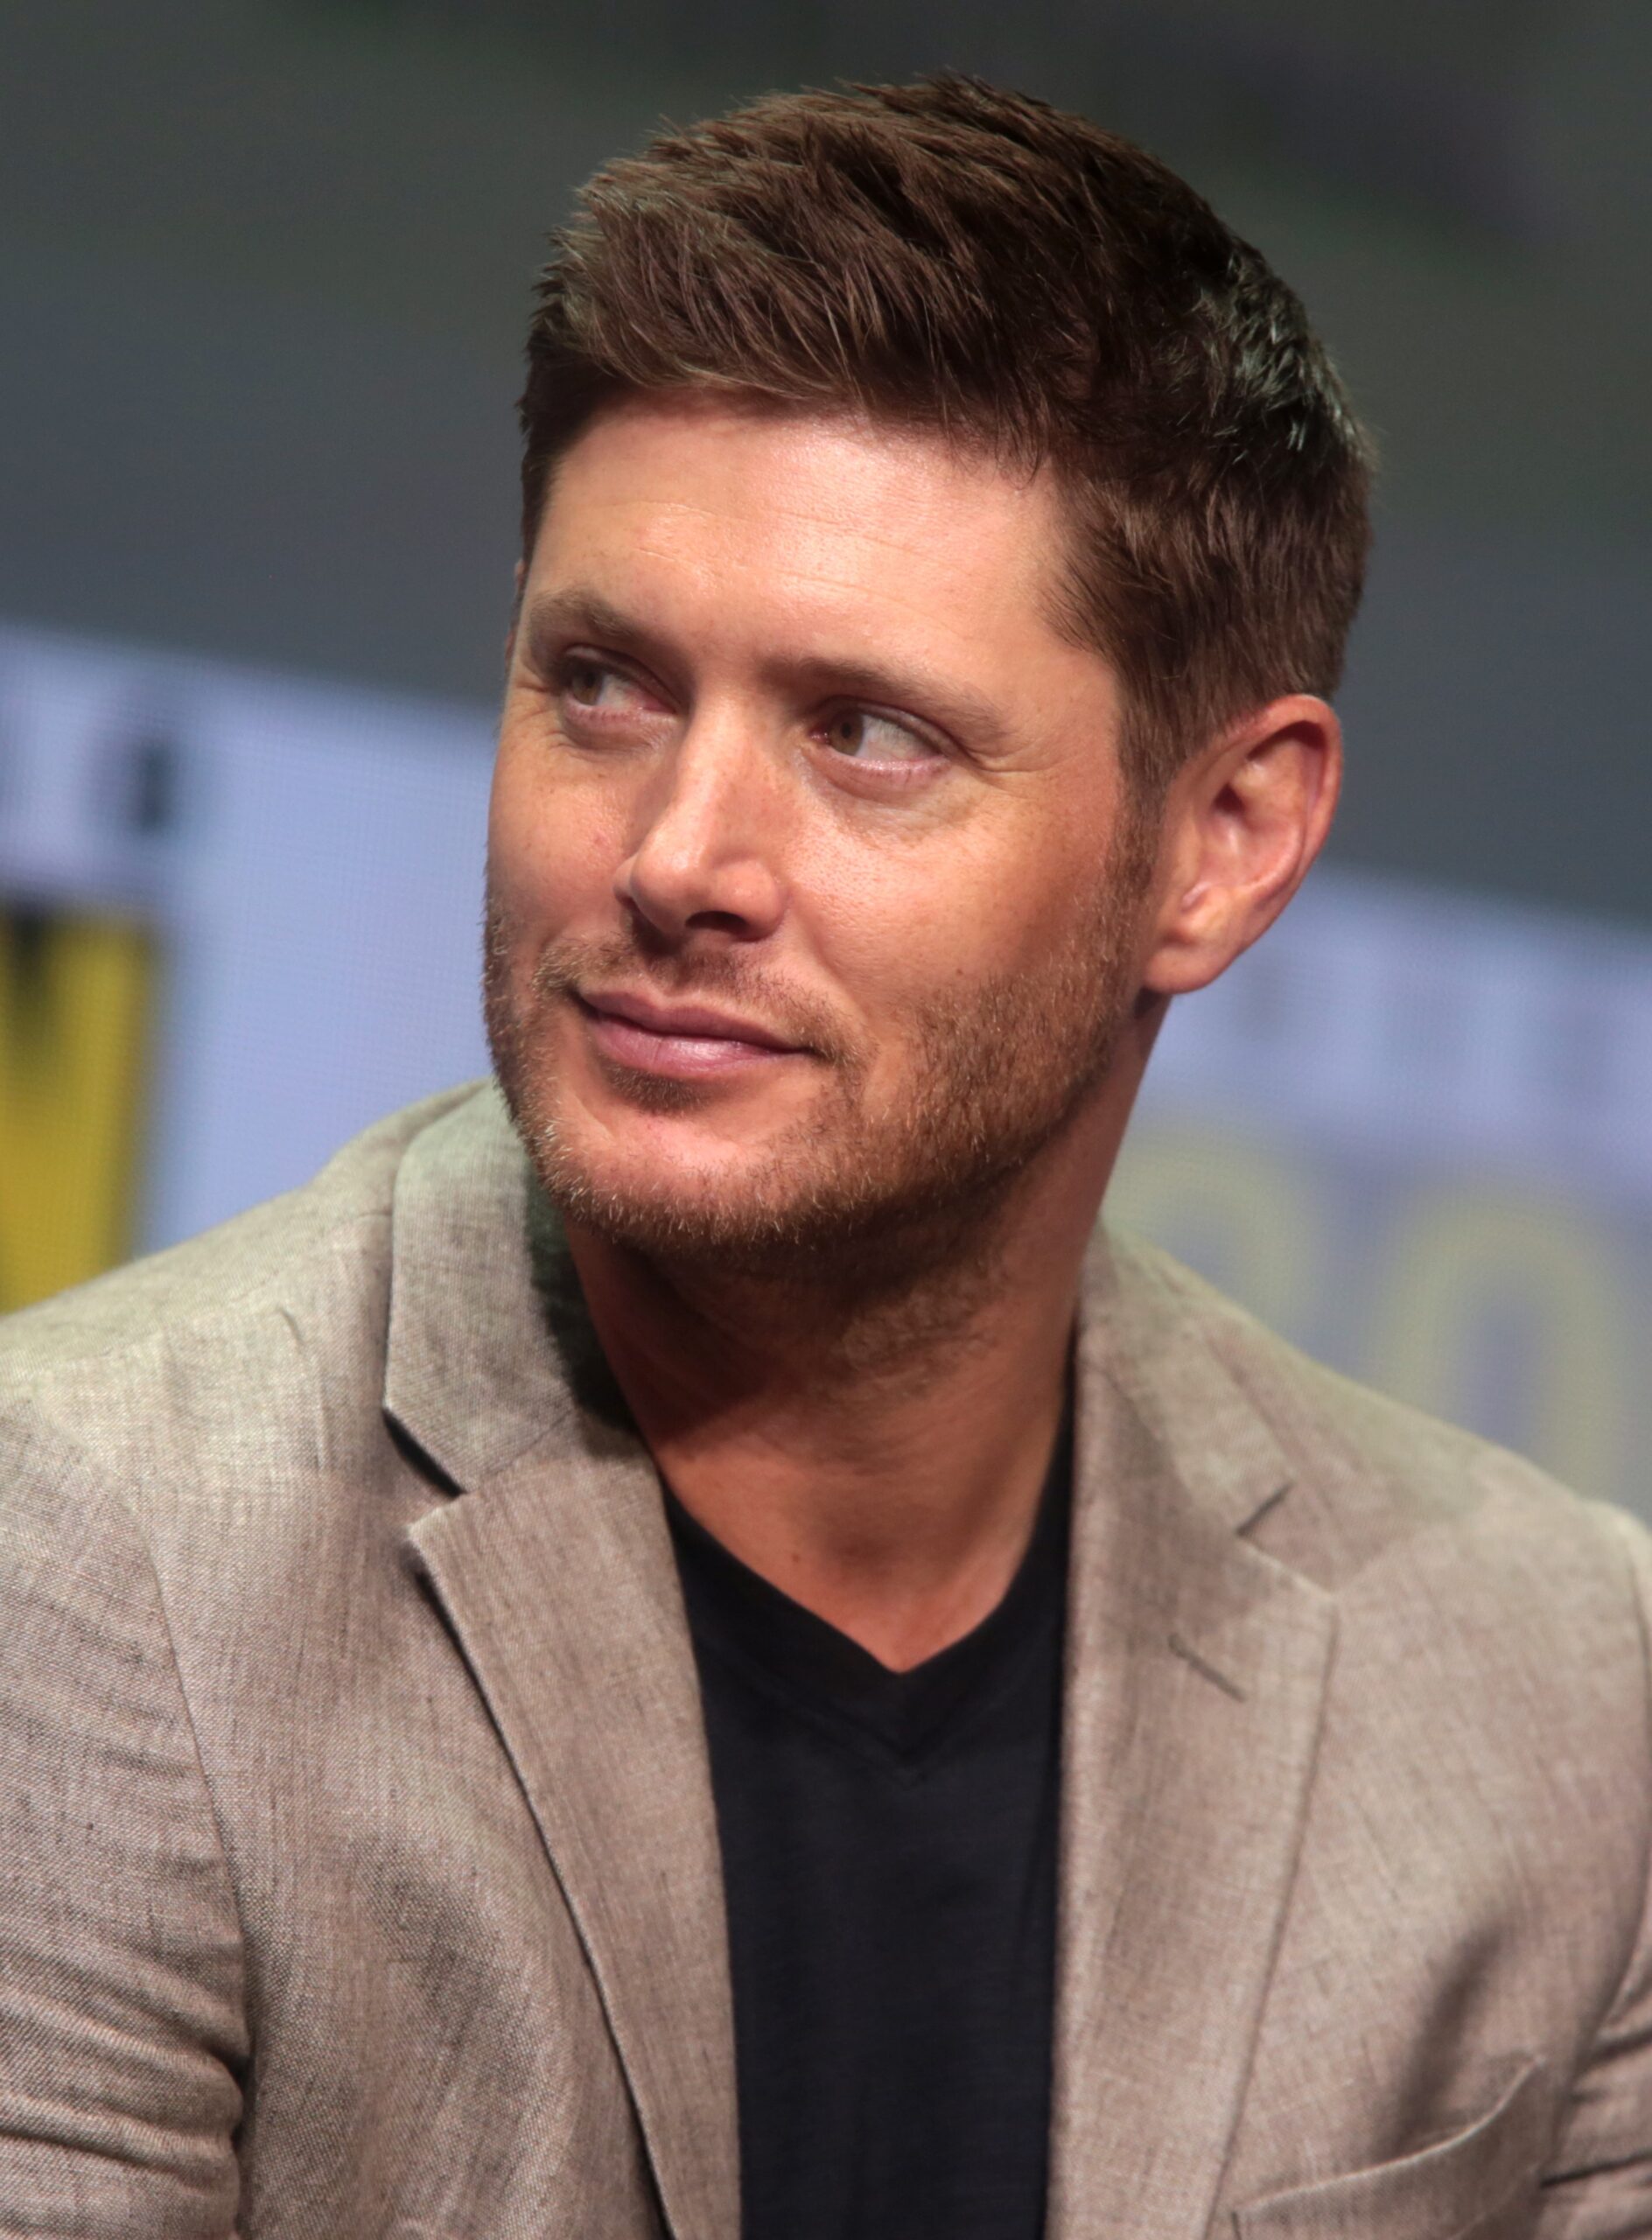 Jensen Ackles joins The Boys in season 3